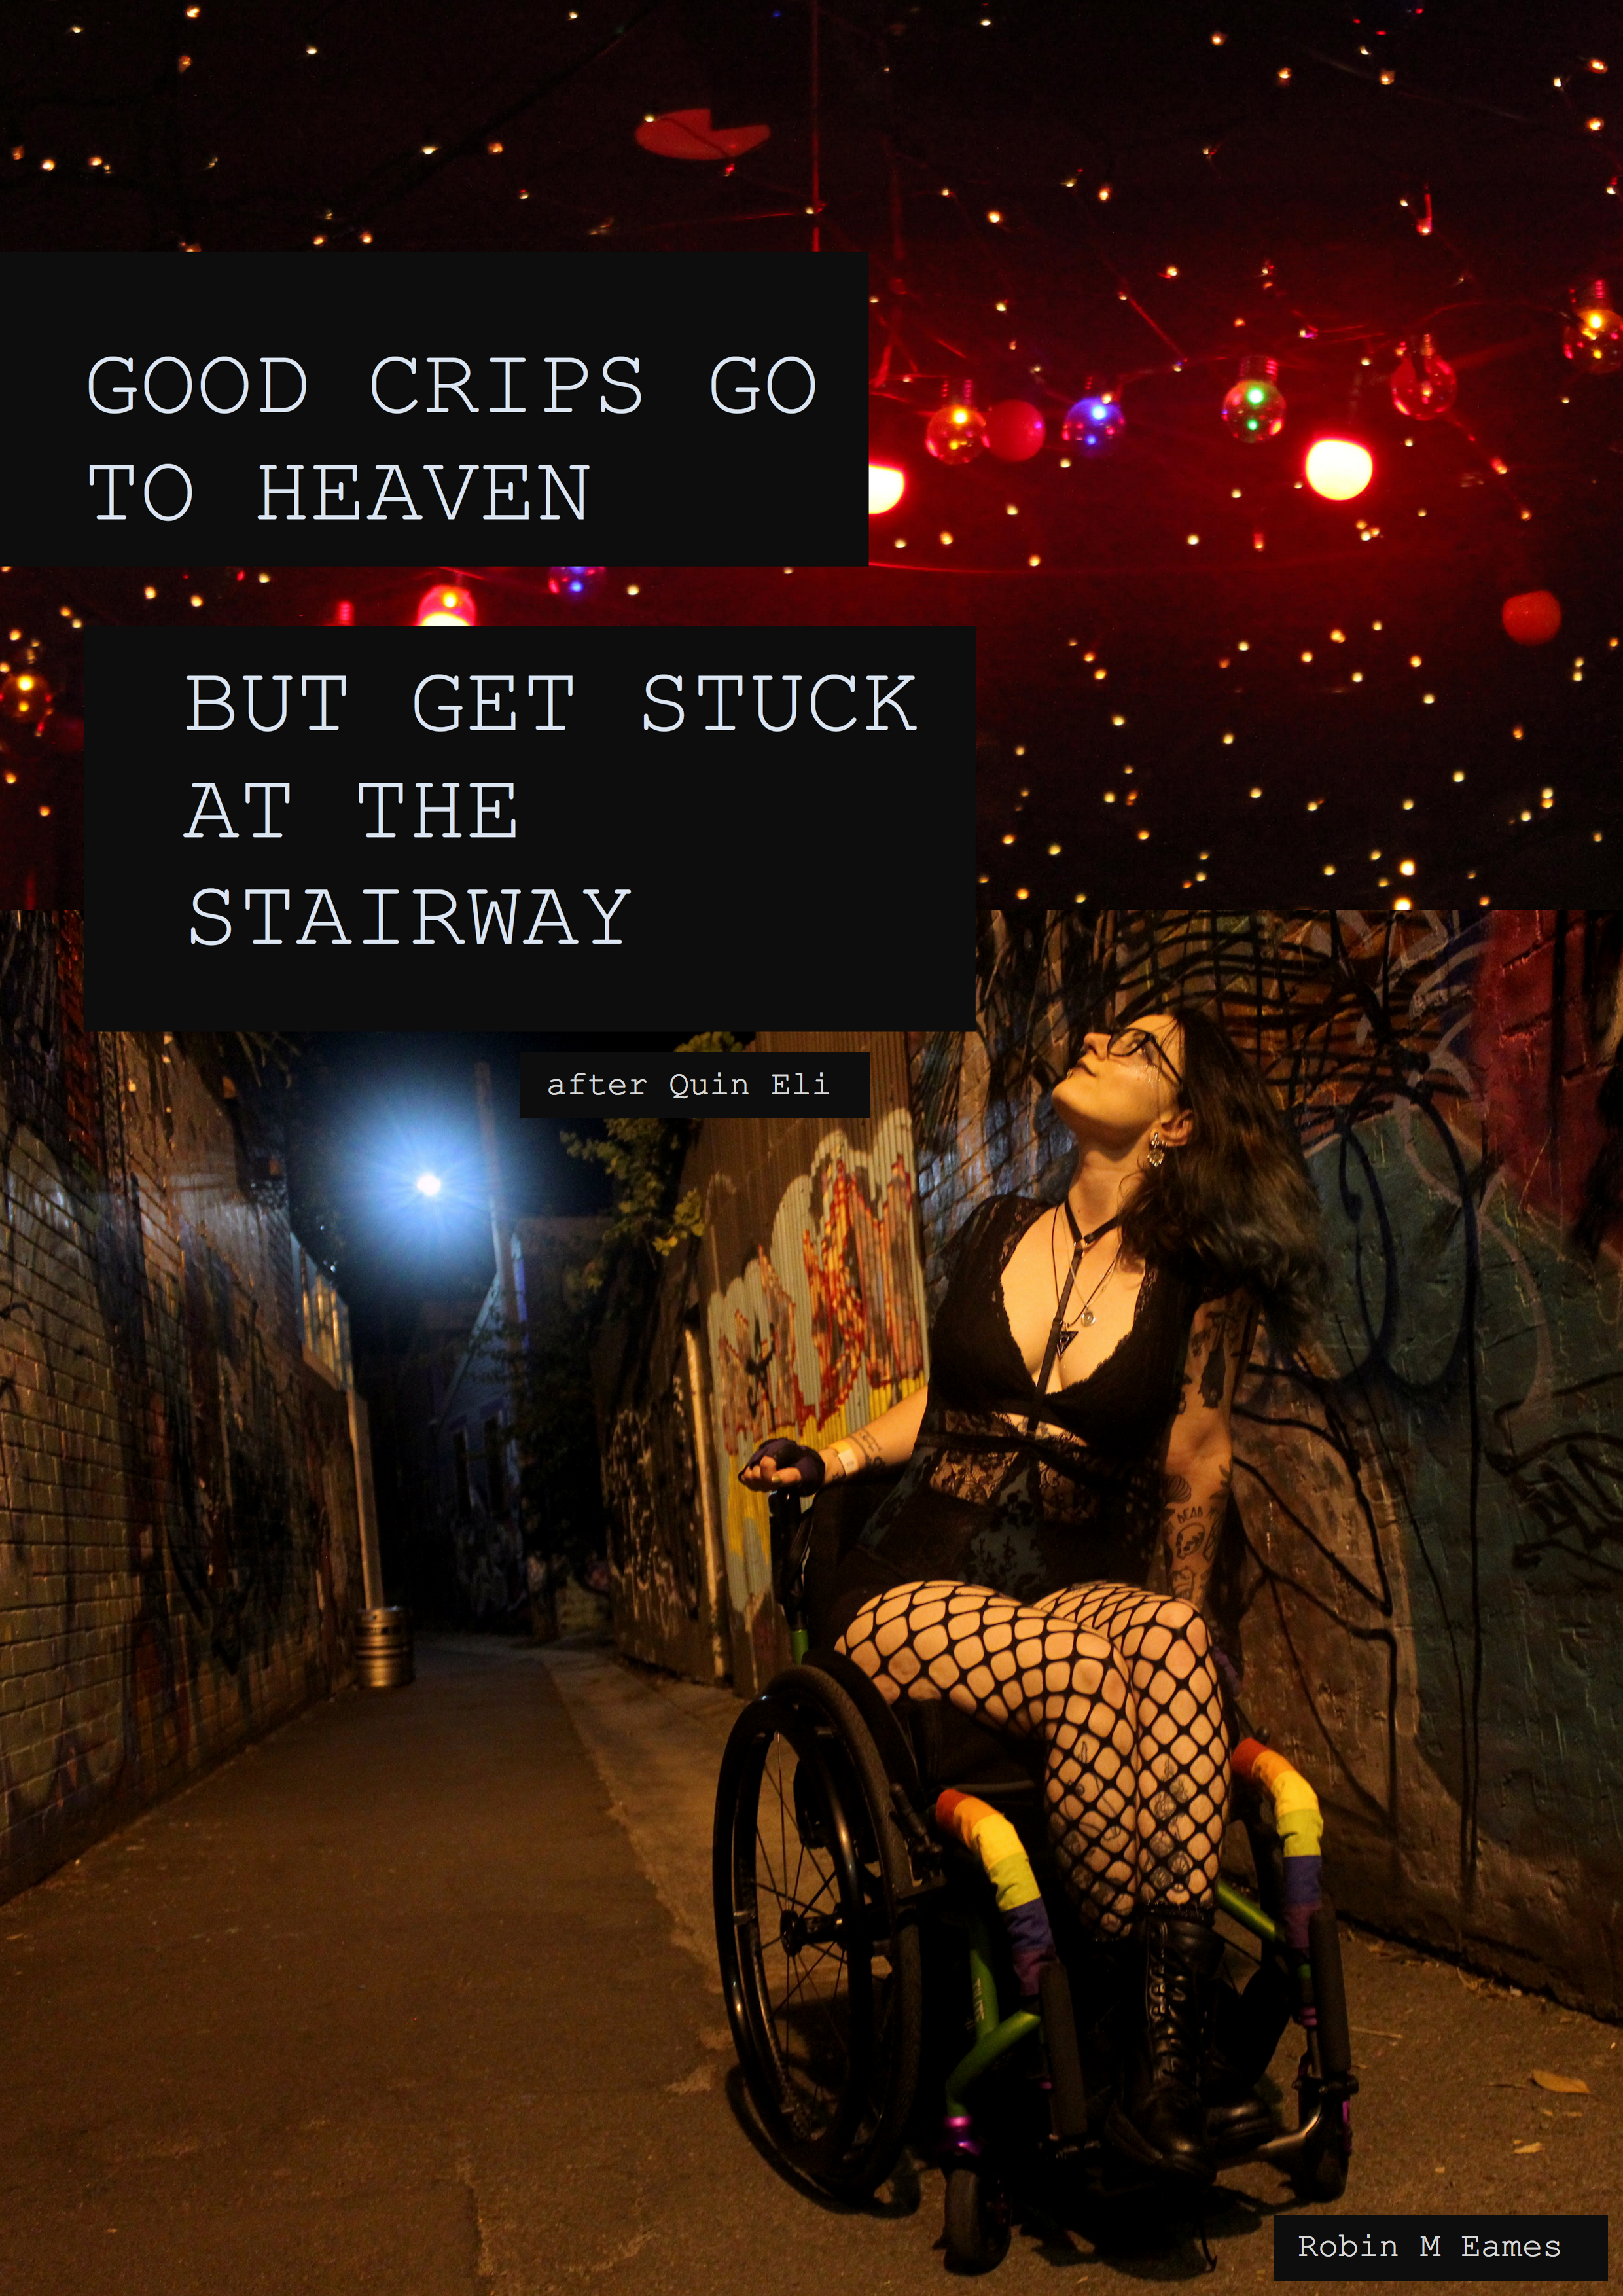 Good Crips Go to Heaven But Get Stuck at the Stairway
after Quin Eli
Robin M Eames
Picture: a white genderqueer wheelchair user in a graffitied alleyway.